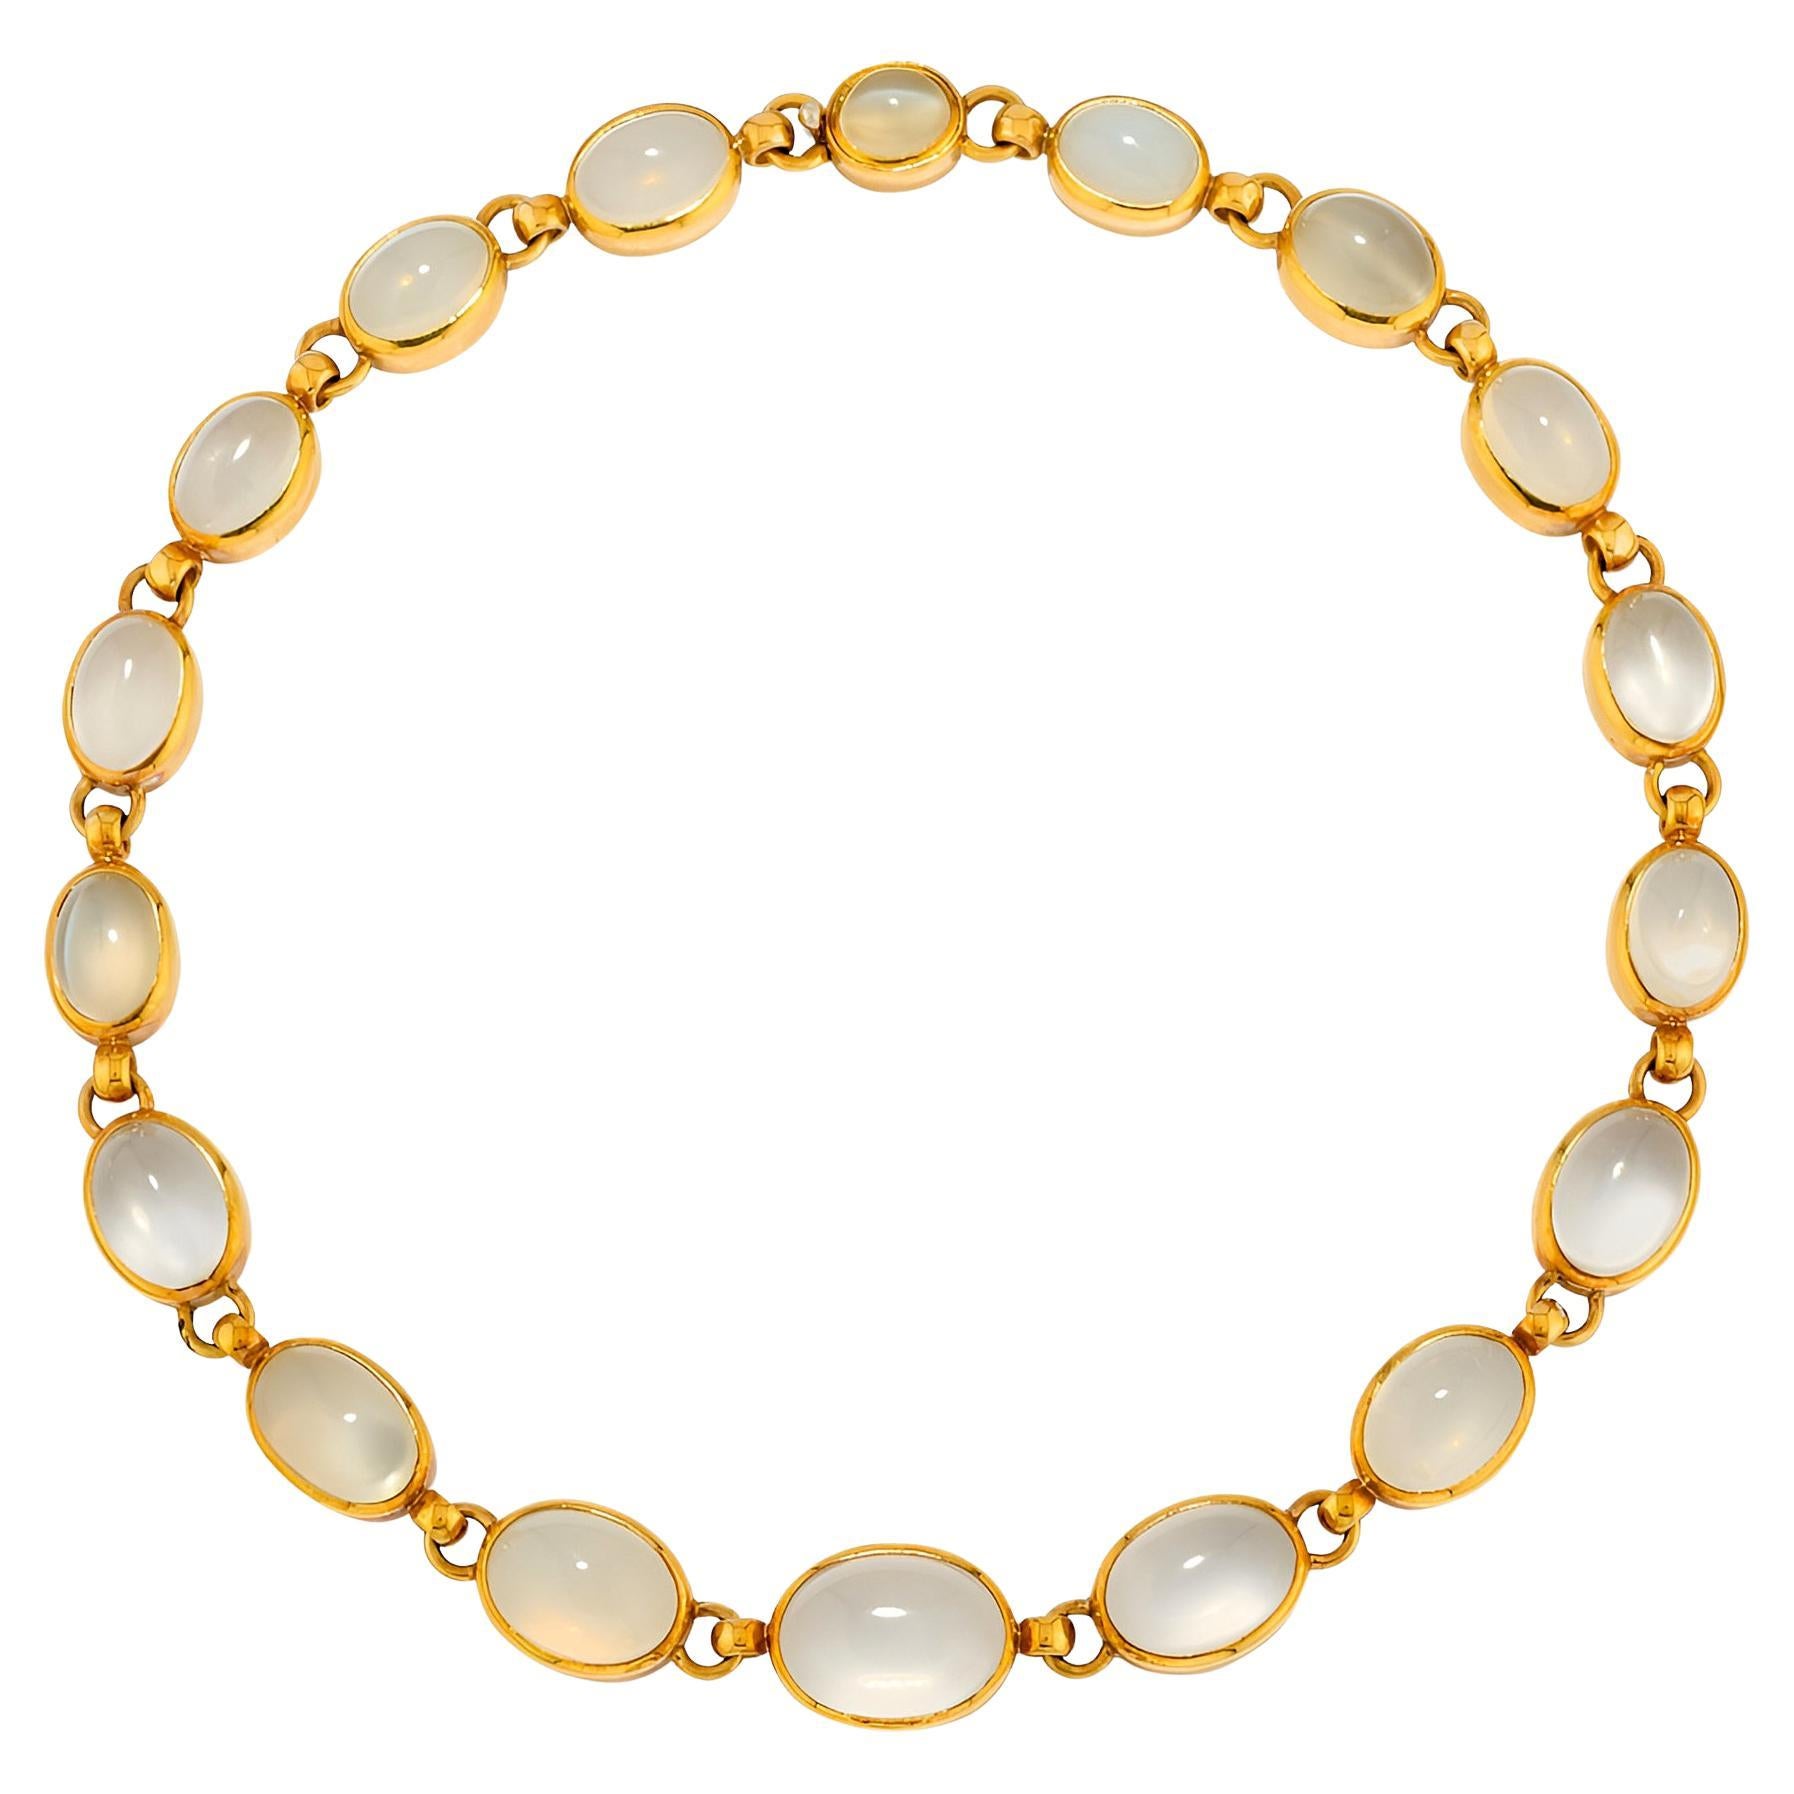 Retro 132.00 Ct Natural Moonstone 18 KT Necklace